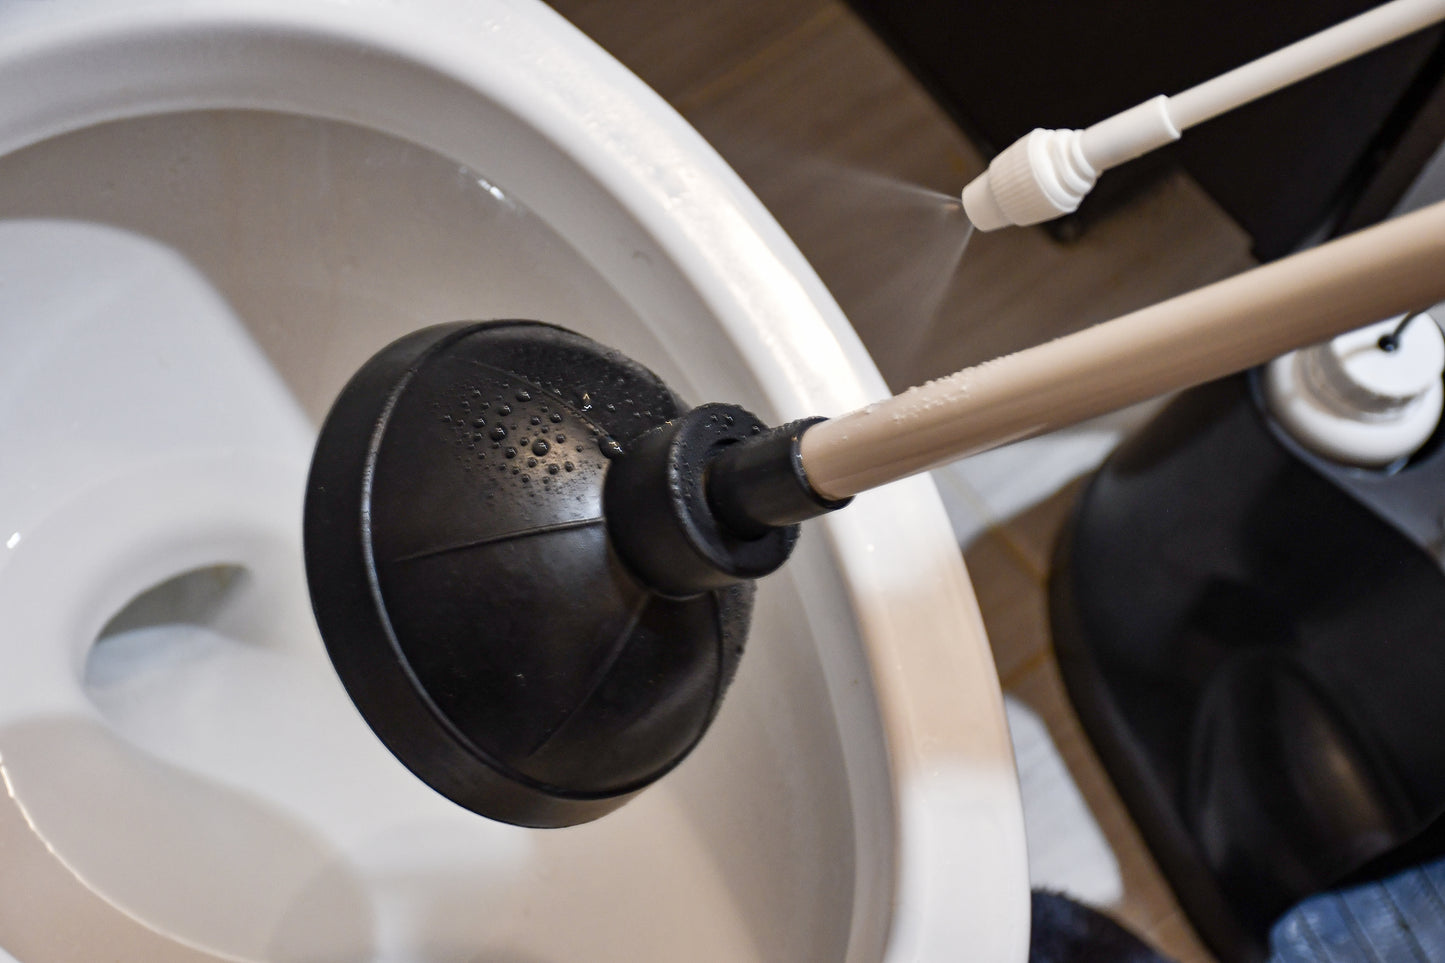 Plunger with self-cleaning mechanism.  Disinfect your plunger and your bathroom.